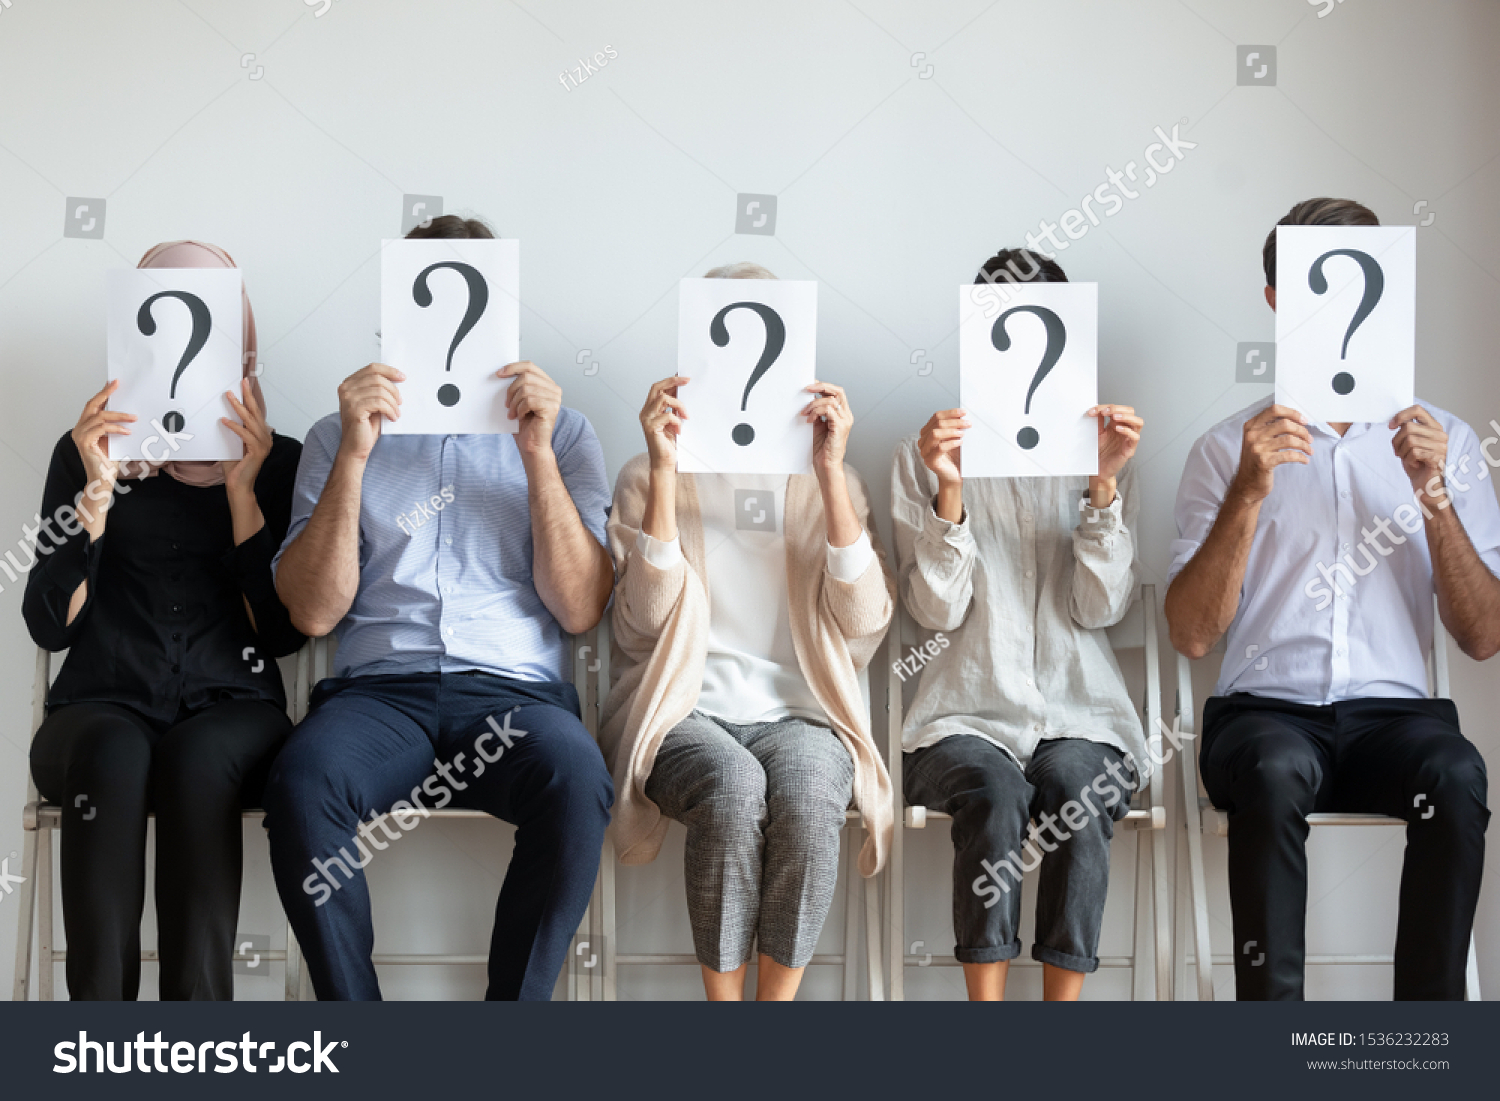 Unemployed professional business people candidates group sit on chairs in row line queue holding sheets with question mark hiding face waiting for job interview, human resources and recruit concept #1536232283